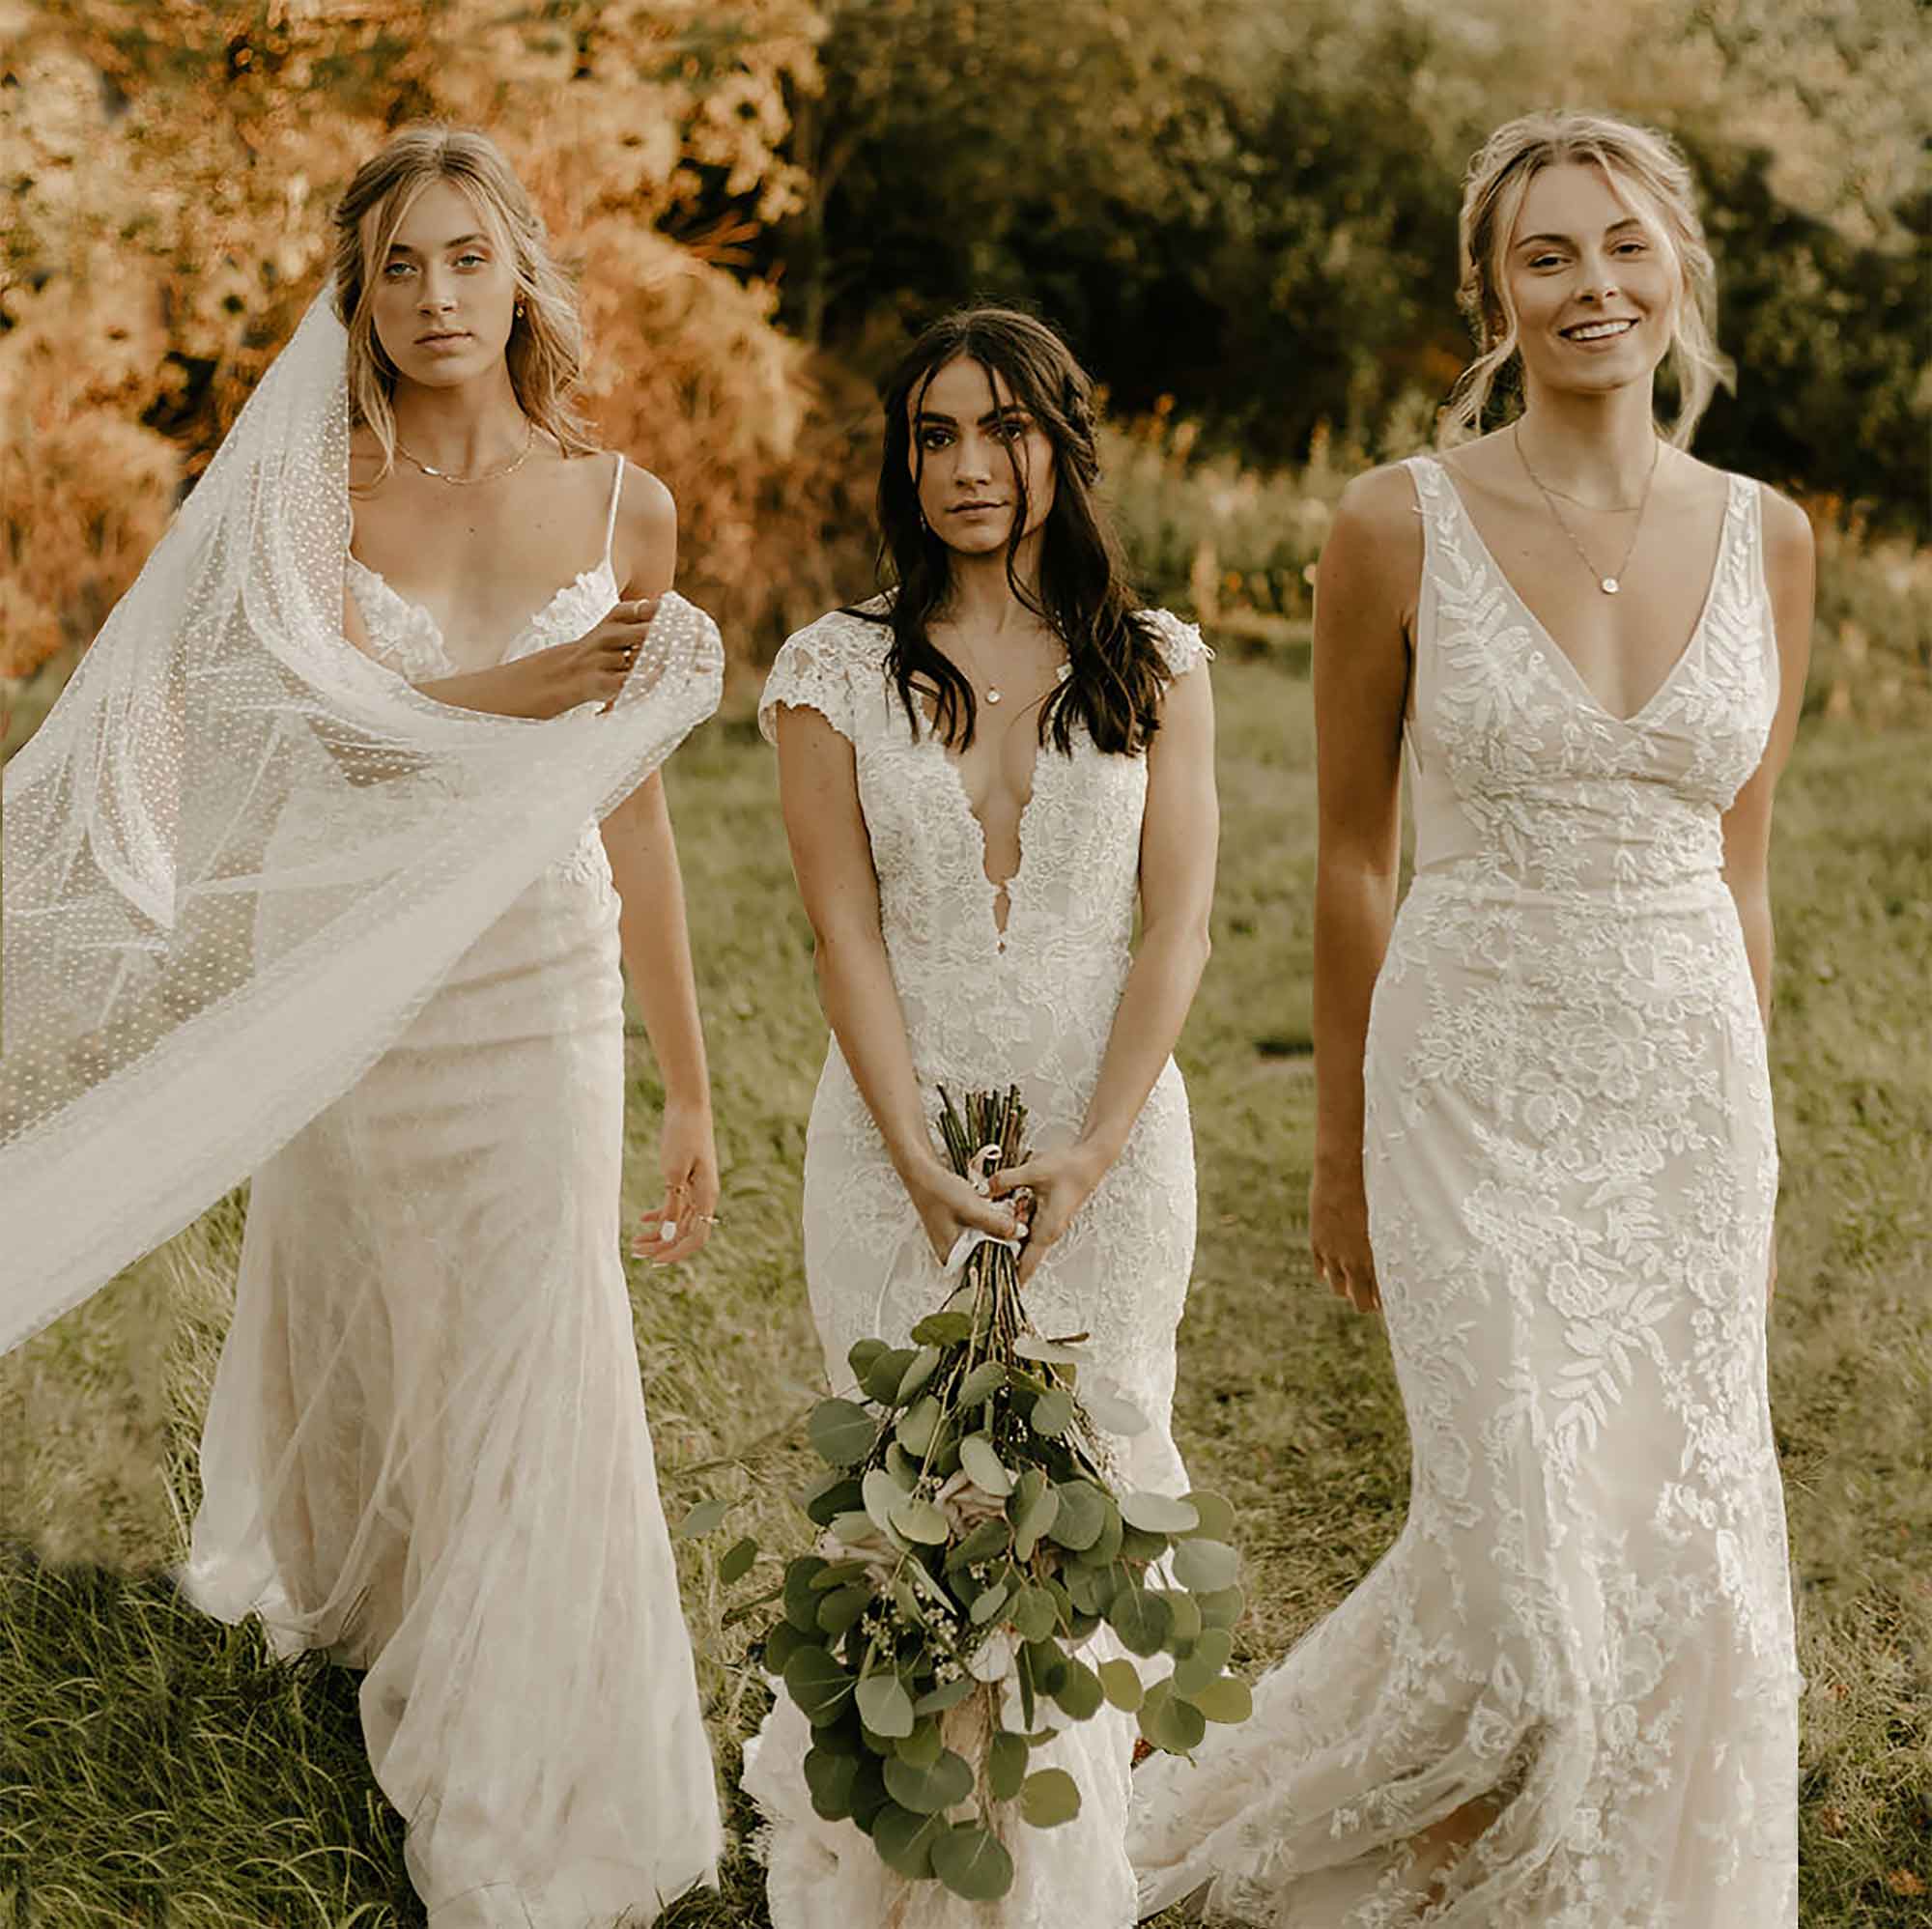 three brides posing for a photo outdoors